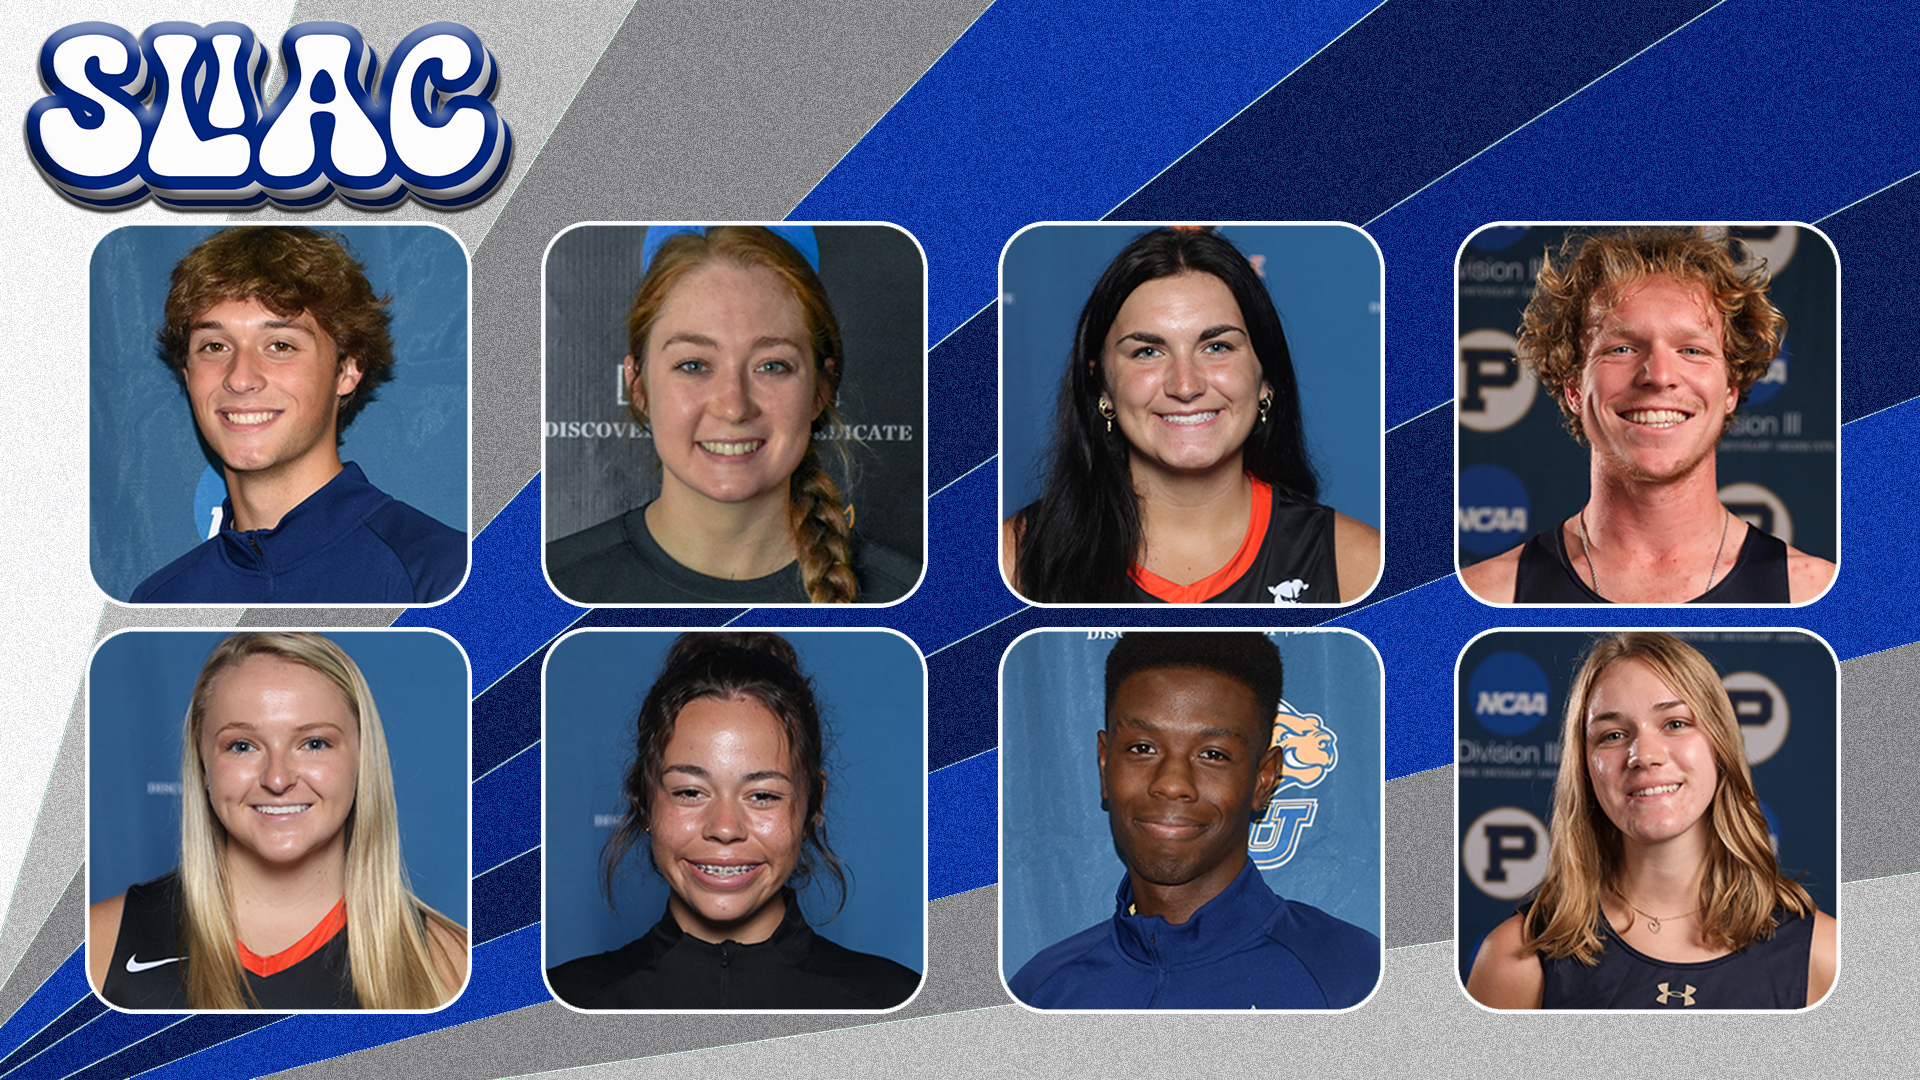 SLIAC Players of the Week - October 10